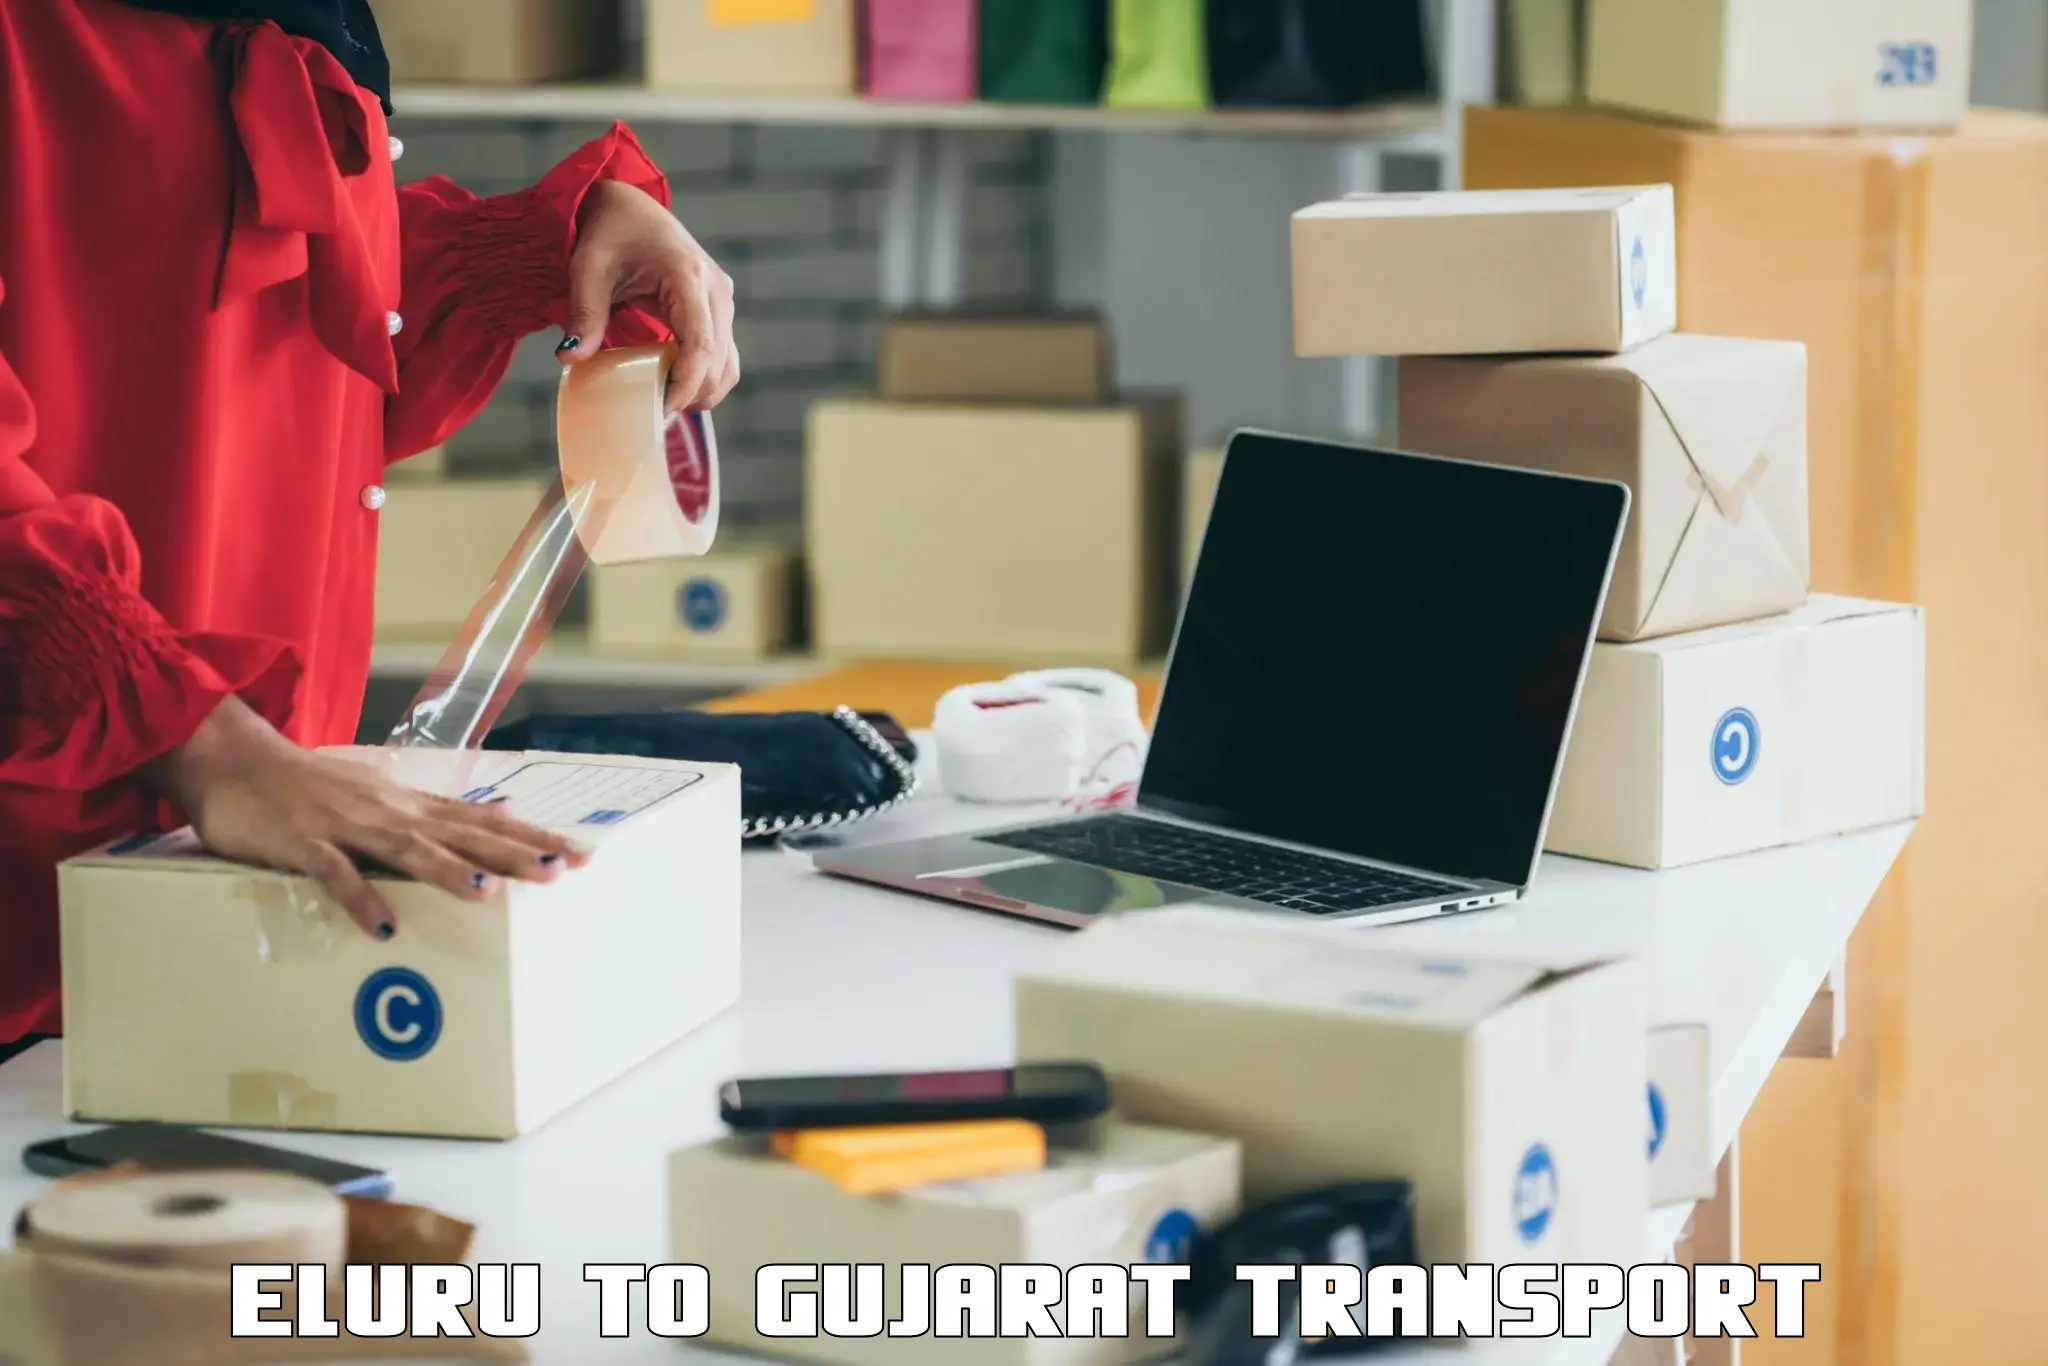 Transport bike from one state to another Eluru to IIIT Surat